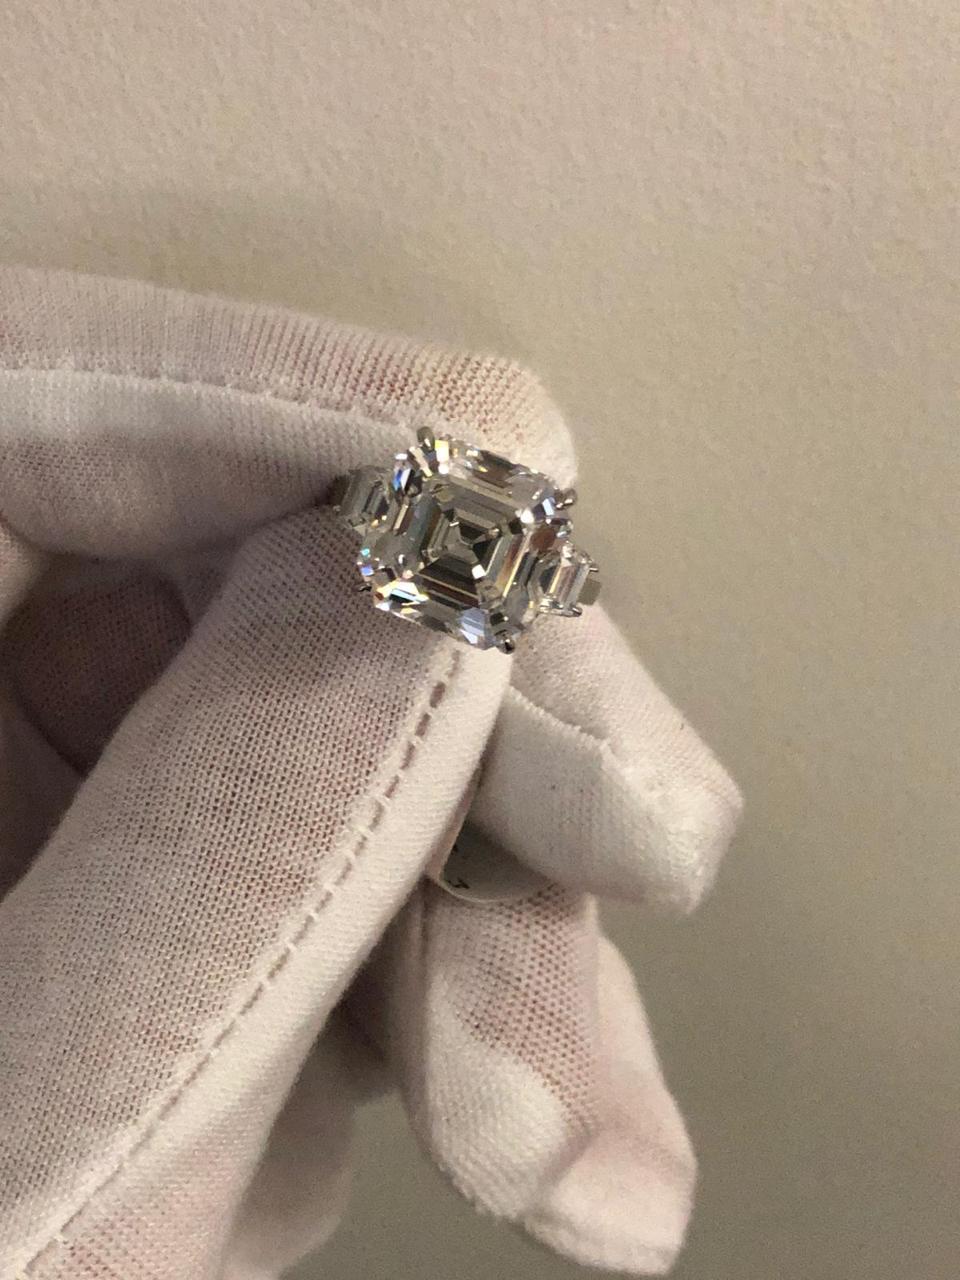 Breathtaking GIA certified diamond ring ready for the big proposal or just a very special upgrade 

This ring contains an impressive 8 carat asscher cut very pure diamond being an E color from Gia is very white and VVS1 clarity is extremely rare in